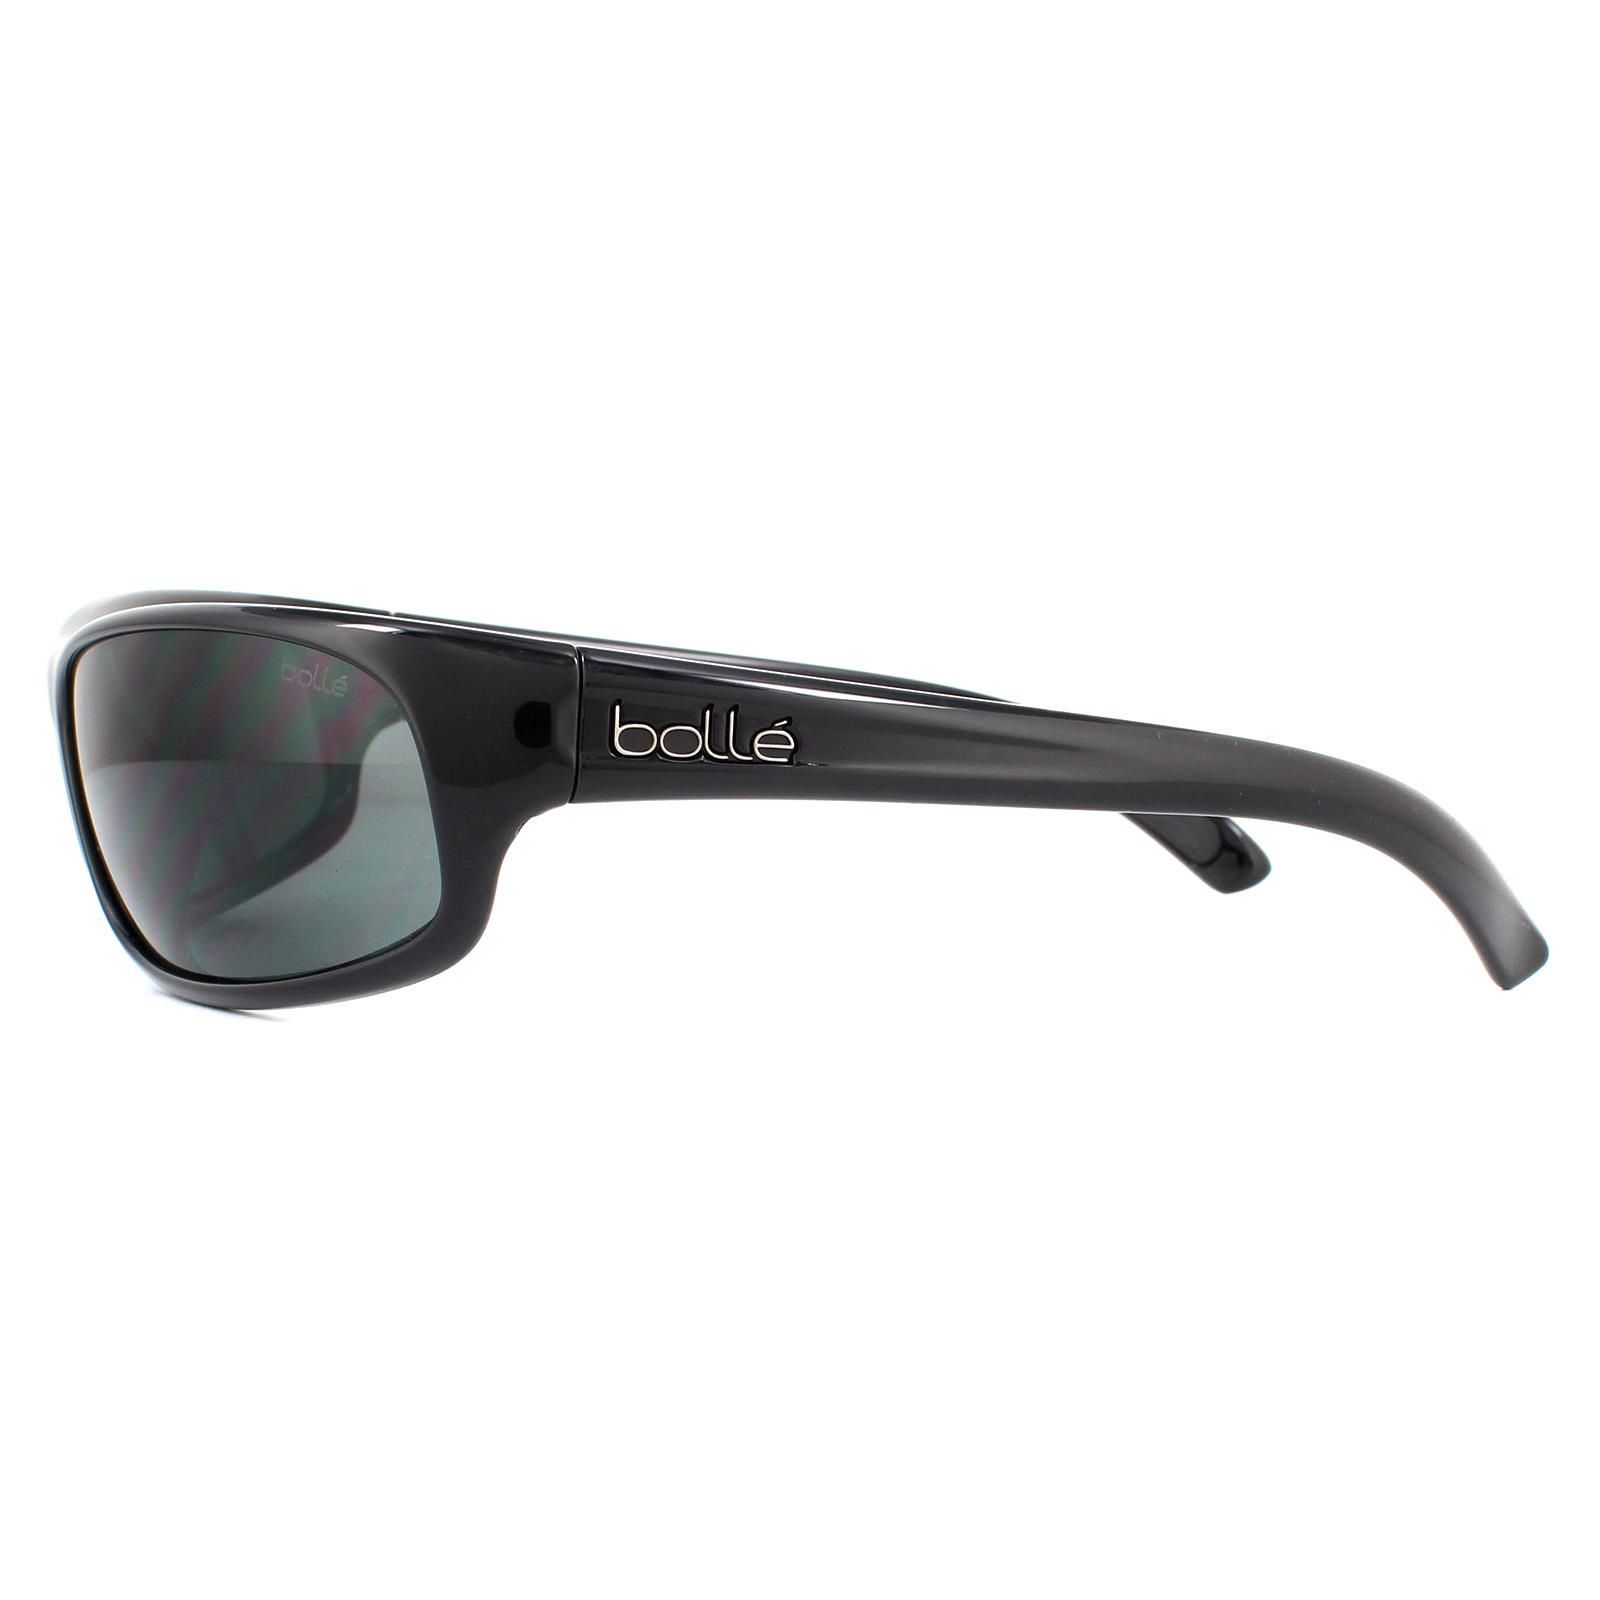 Bolle Sunglasses Anaconda 10339 Shiny Black TNS Grey are a sporty wrap around model with smooth sleek lines and featuring thermogrip temple tips and nose pads for added comfort